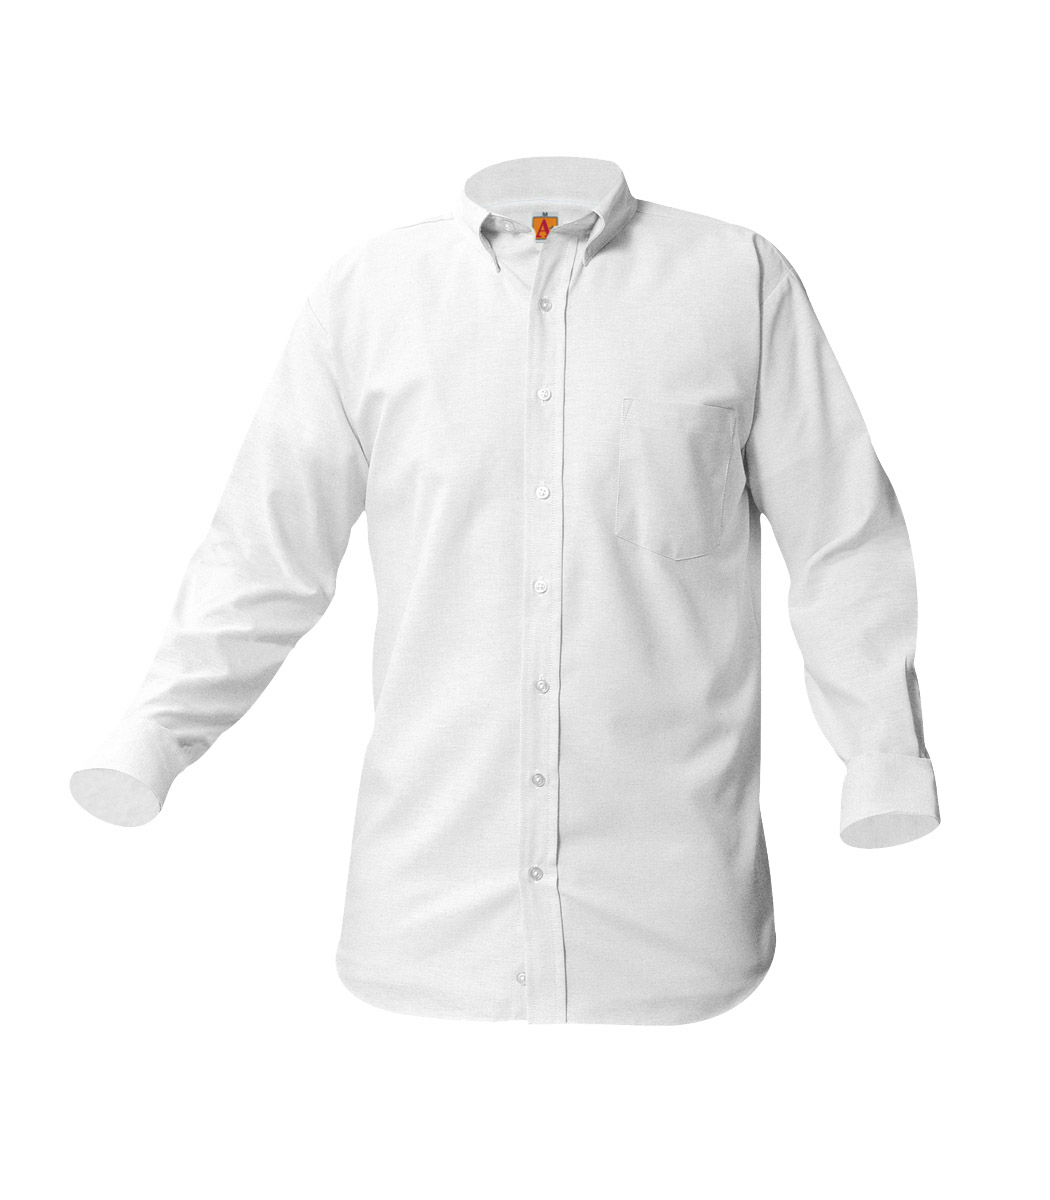 CPA long-sleeve Oxford